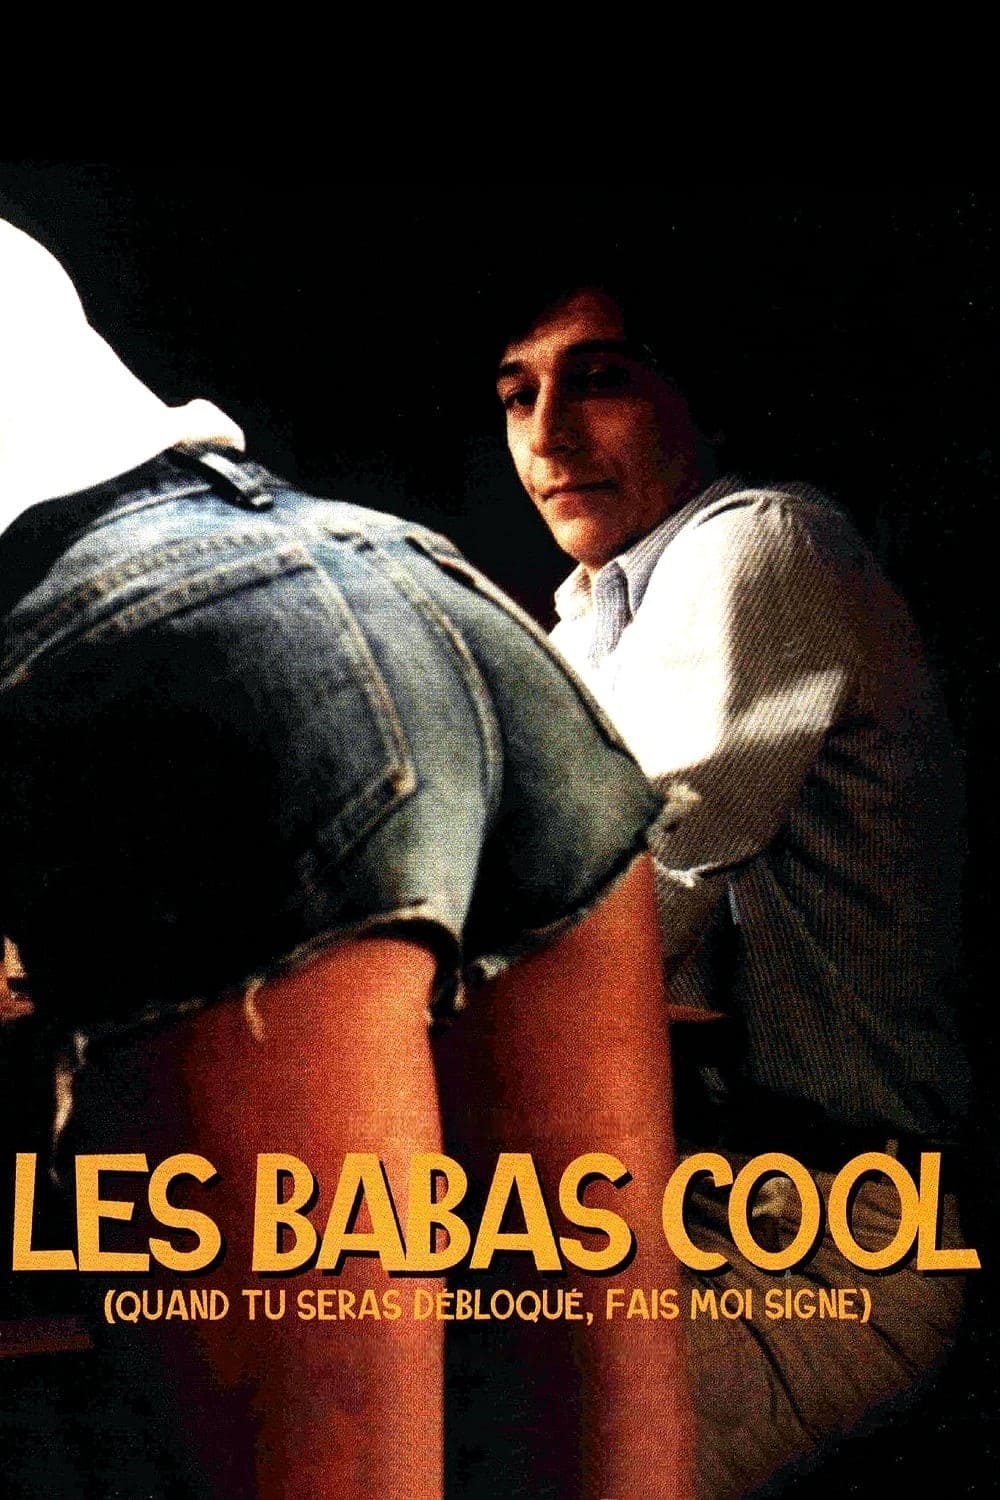 Les babas-cool (1981)